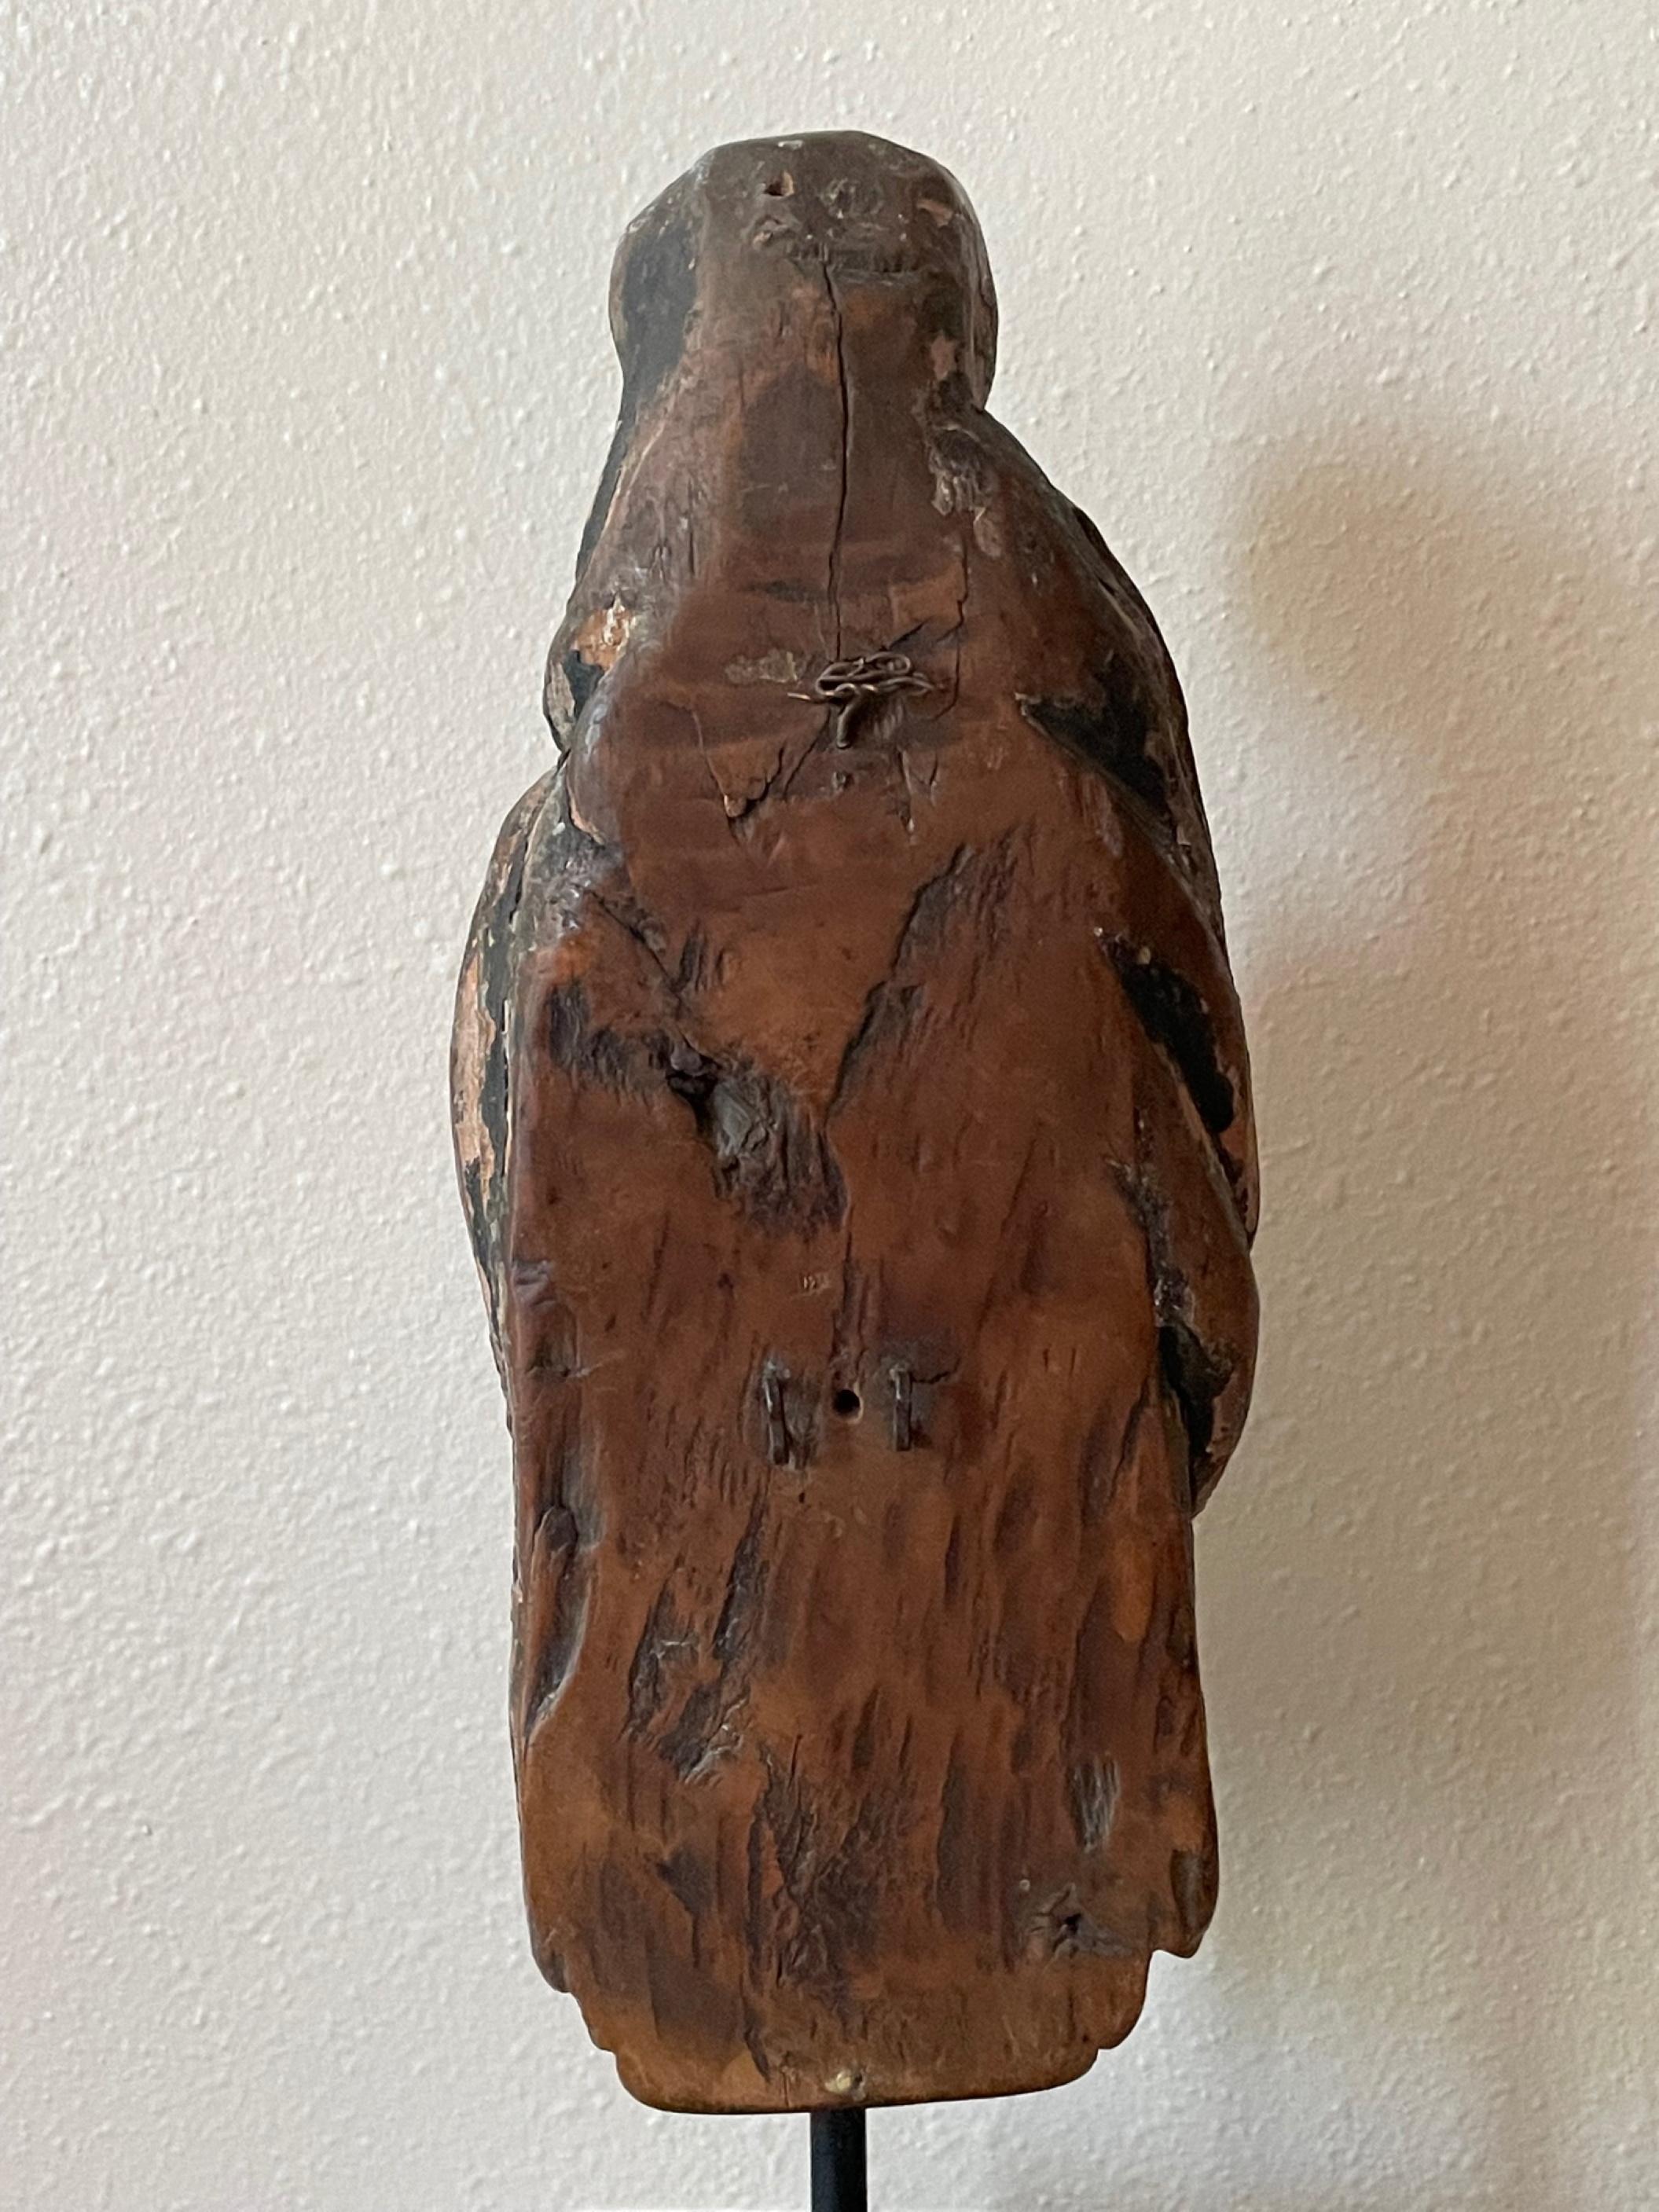 12th Century Rare Romanesque Wood Sculpture of the Virgin Mary In Good Condition For Sale In Vero Beach, FL